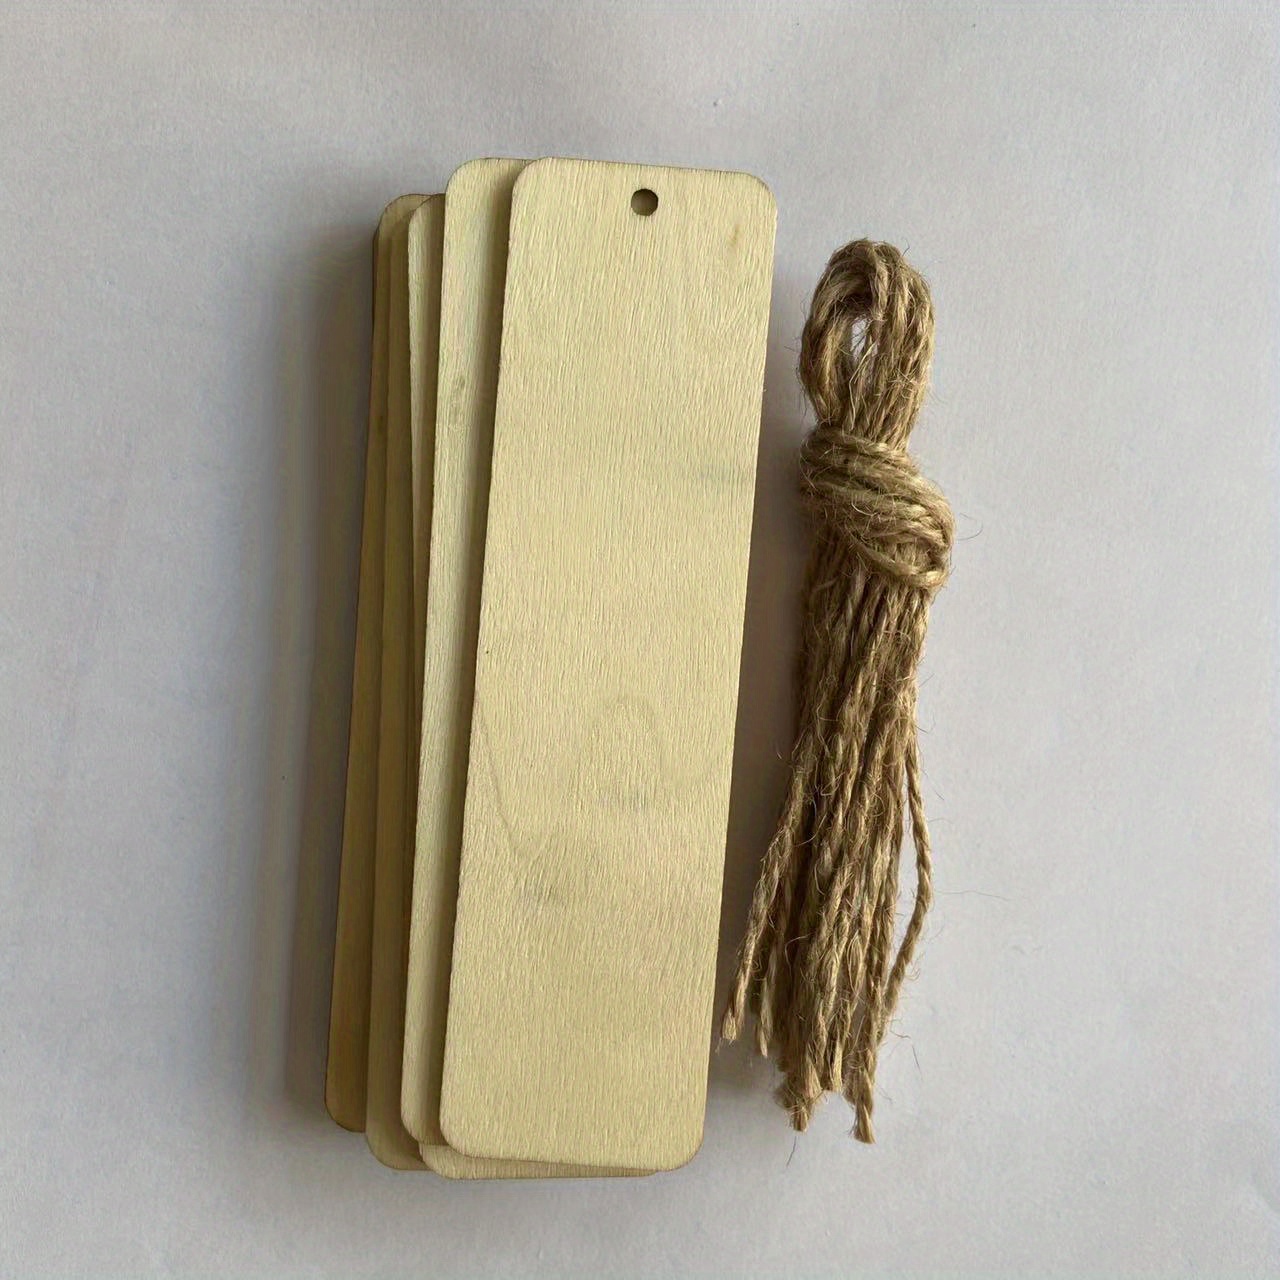 Blank Bookmarks To Decorate 20 Pcs Wood Blank Bookmarks Unfinished Wooden  Bookmark Unpainted Rectangle Bookmark With Ropes